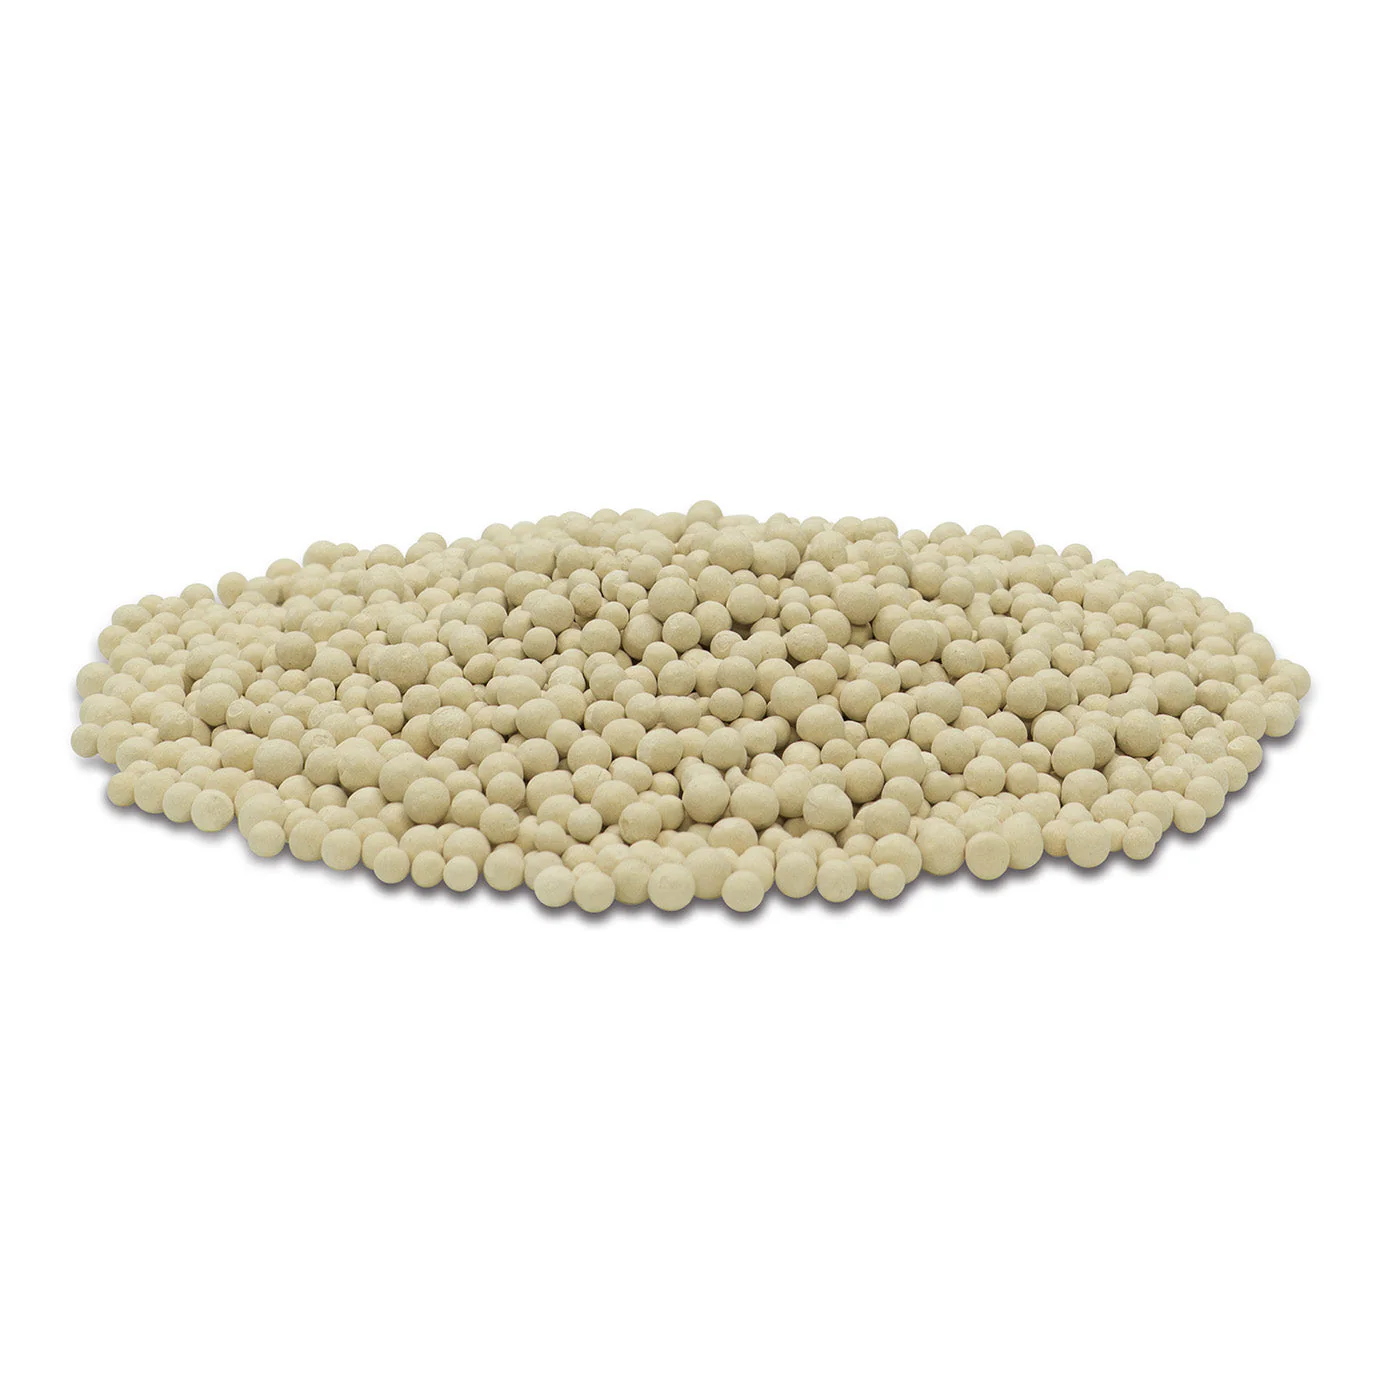 Ethanol Dehydration Sieve Beads Type 3A Questions & Answers